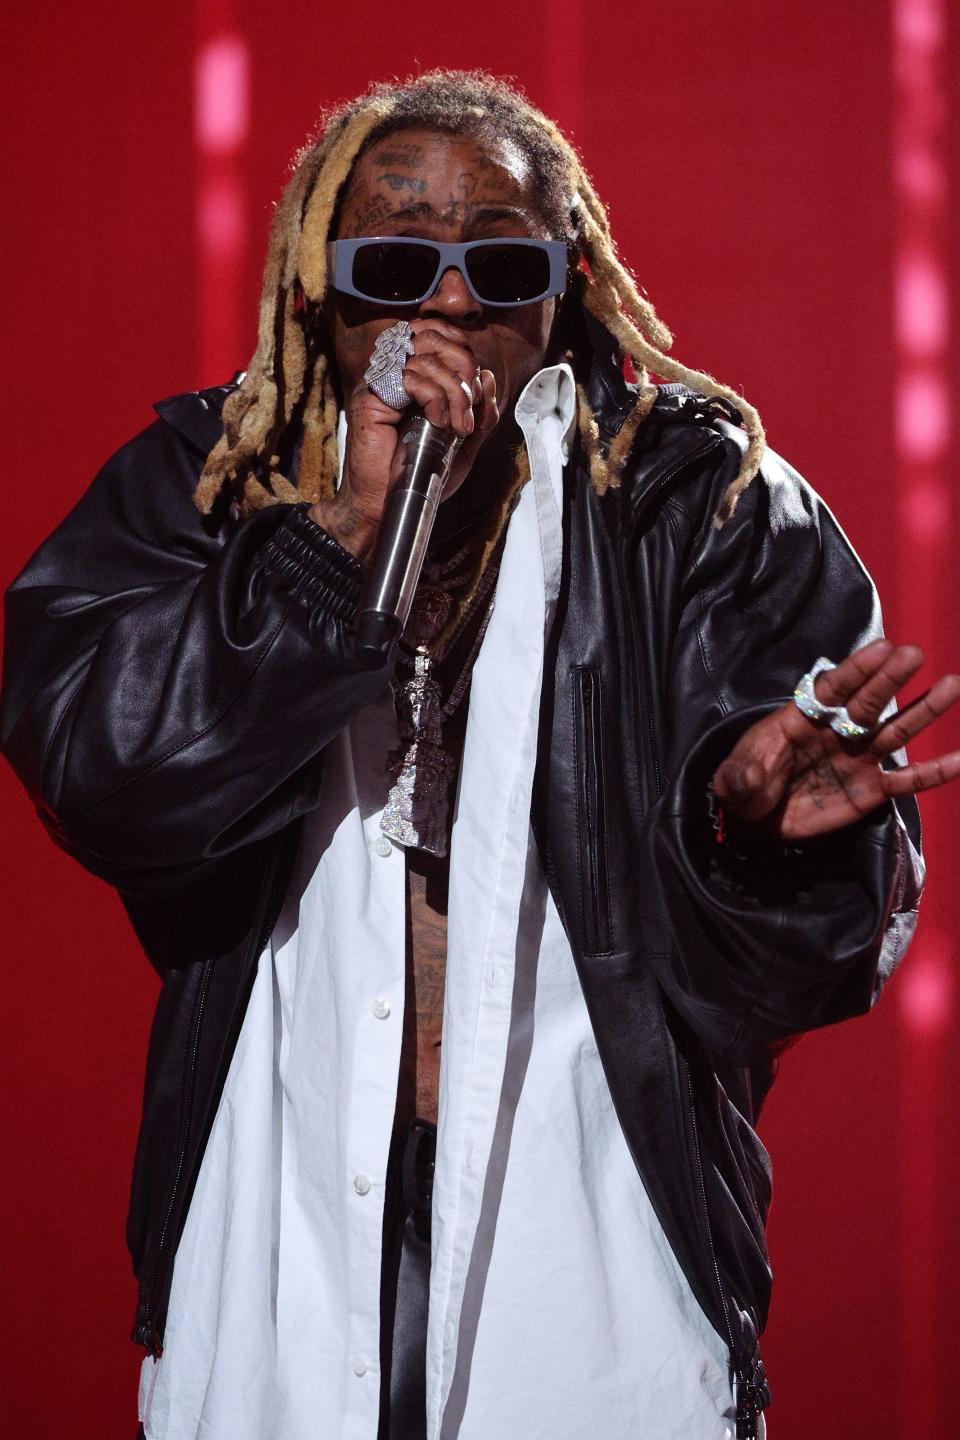 Lil Wayne seemingly reacted to his wax figure at the Hollywood Wax Museum.